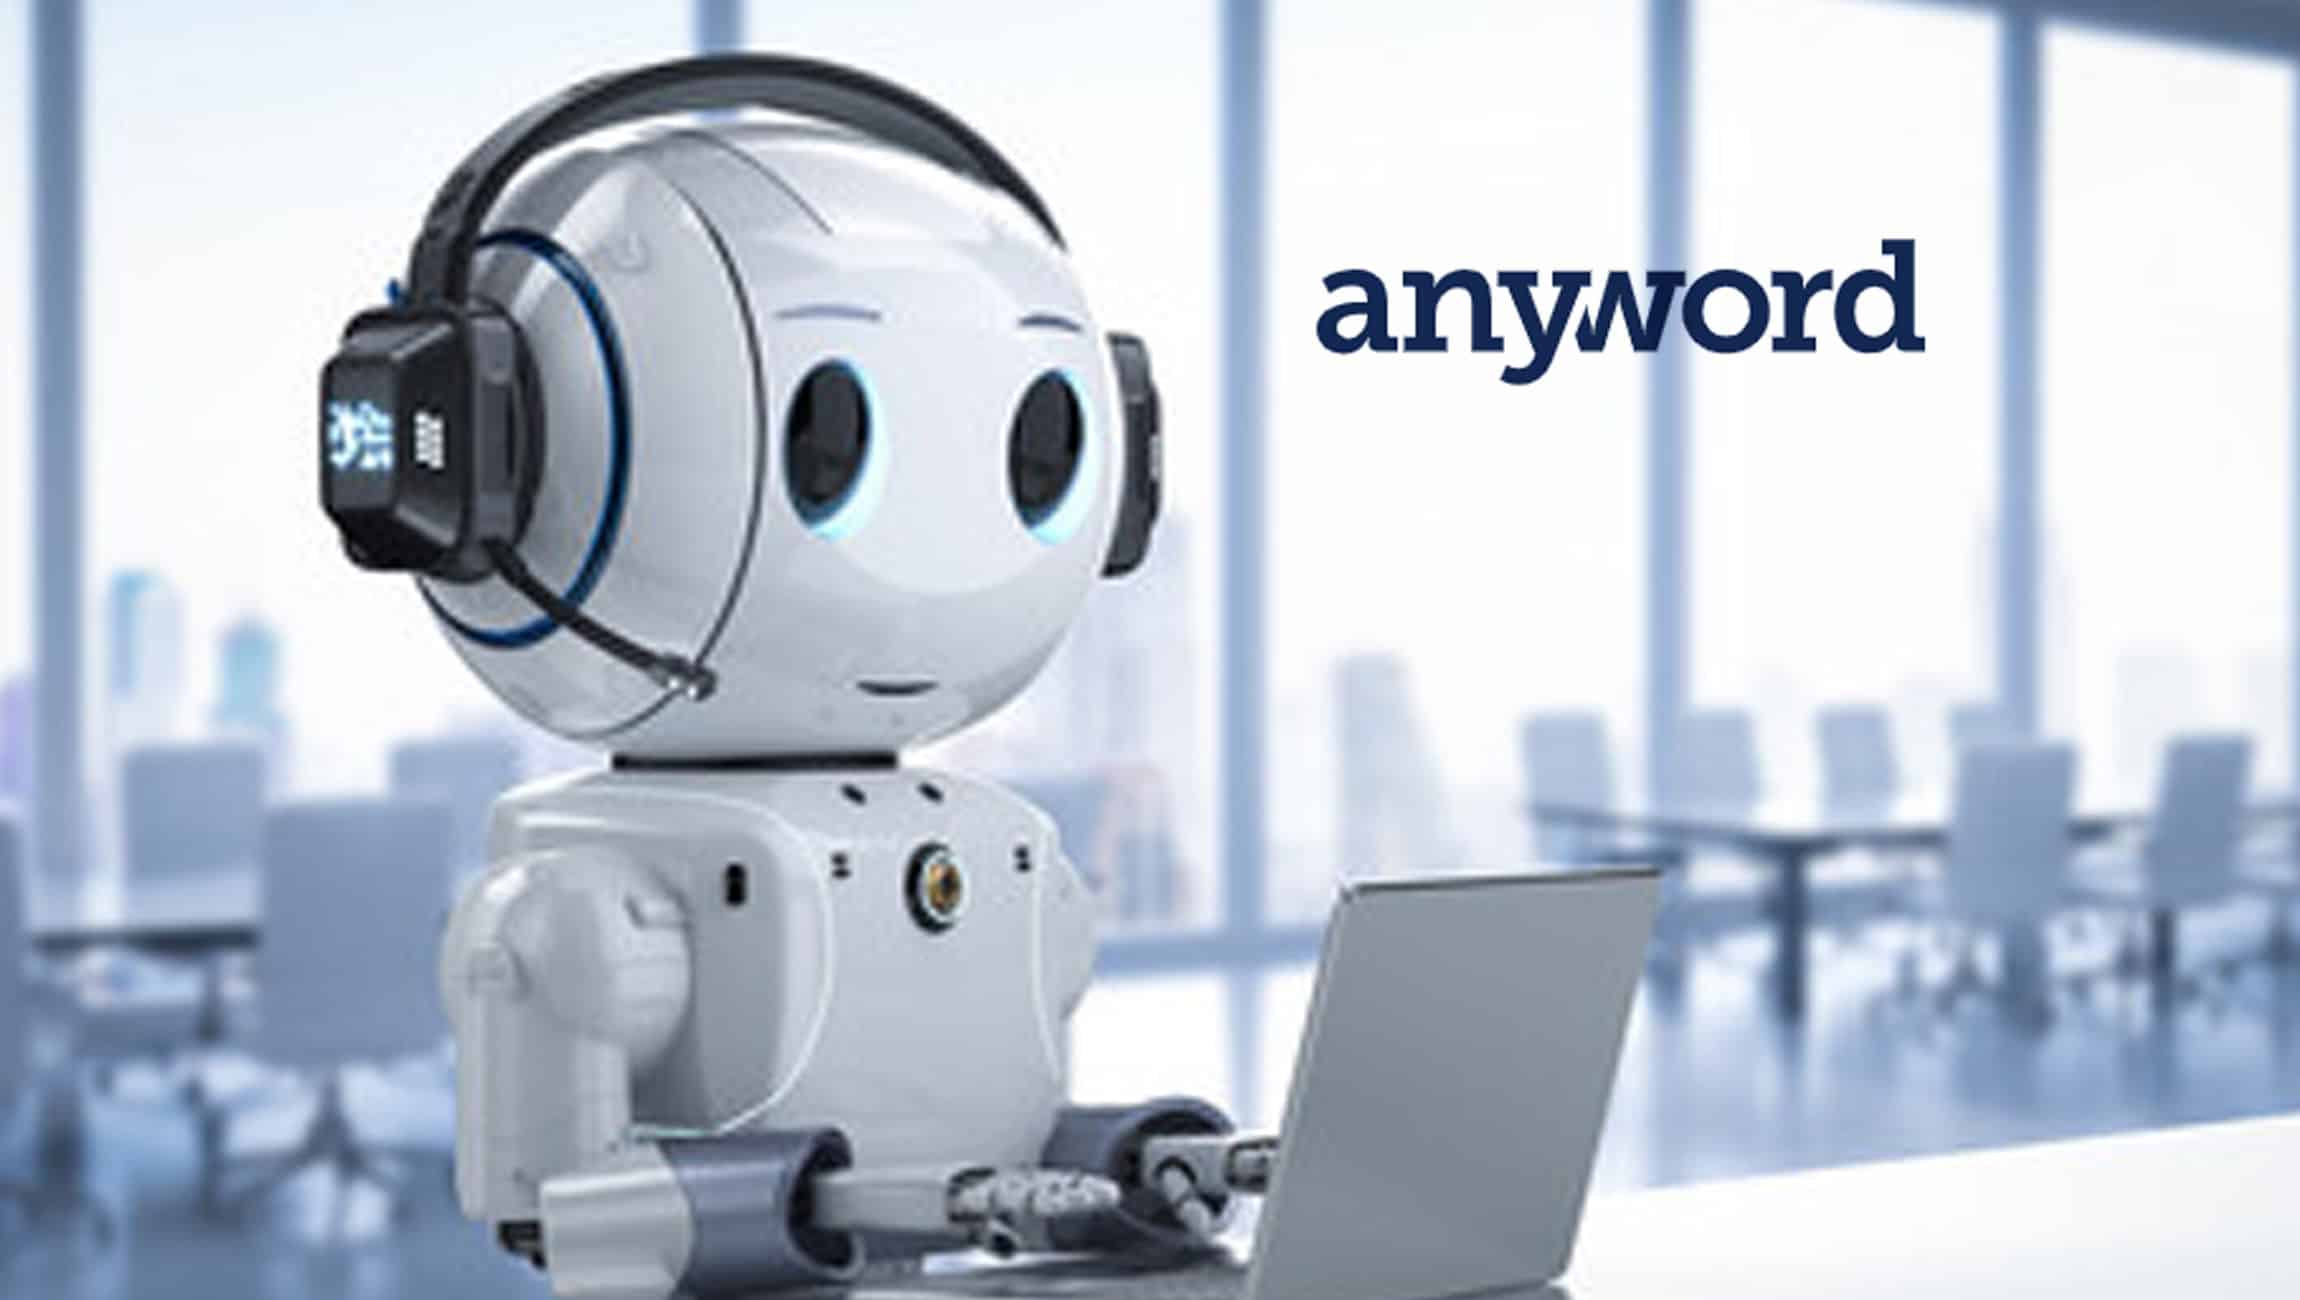 Anyword Creates the Future of AI A Conversation With a Computer